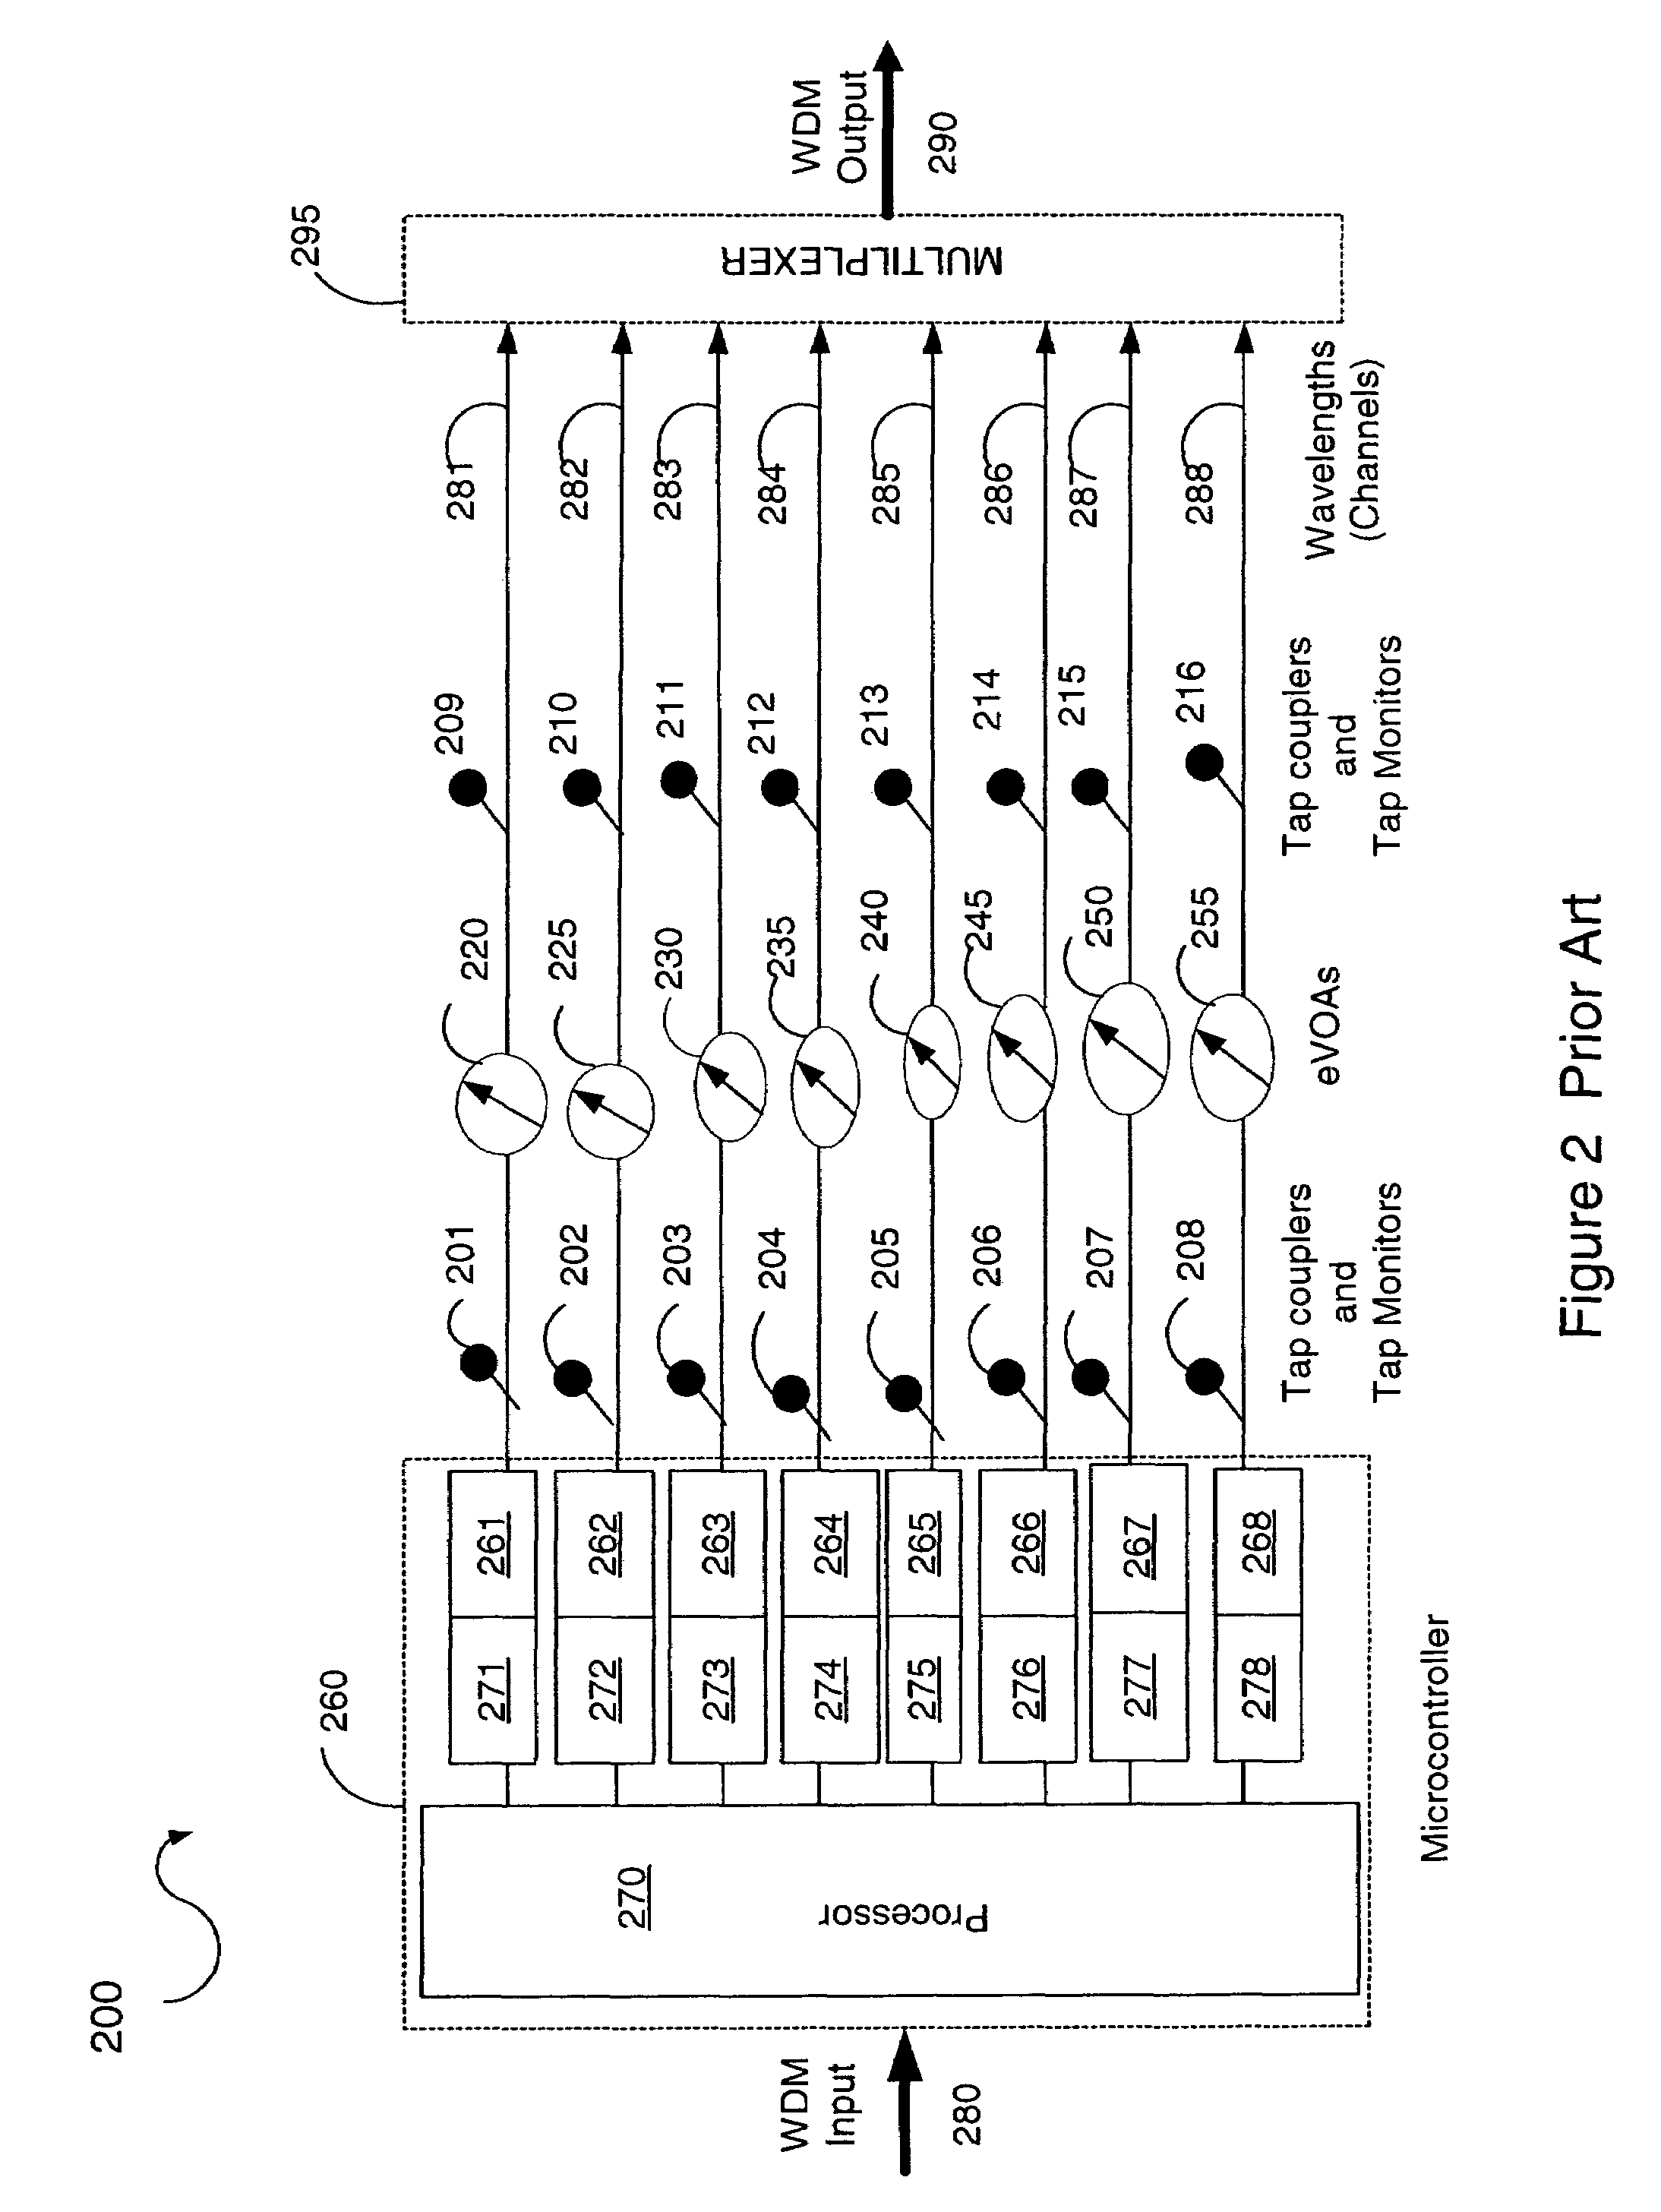 Method and system for operating a plurality of electronic variable optical attenuators (eVOAs)